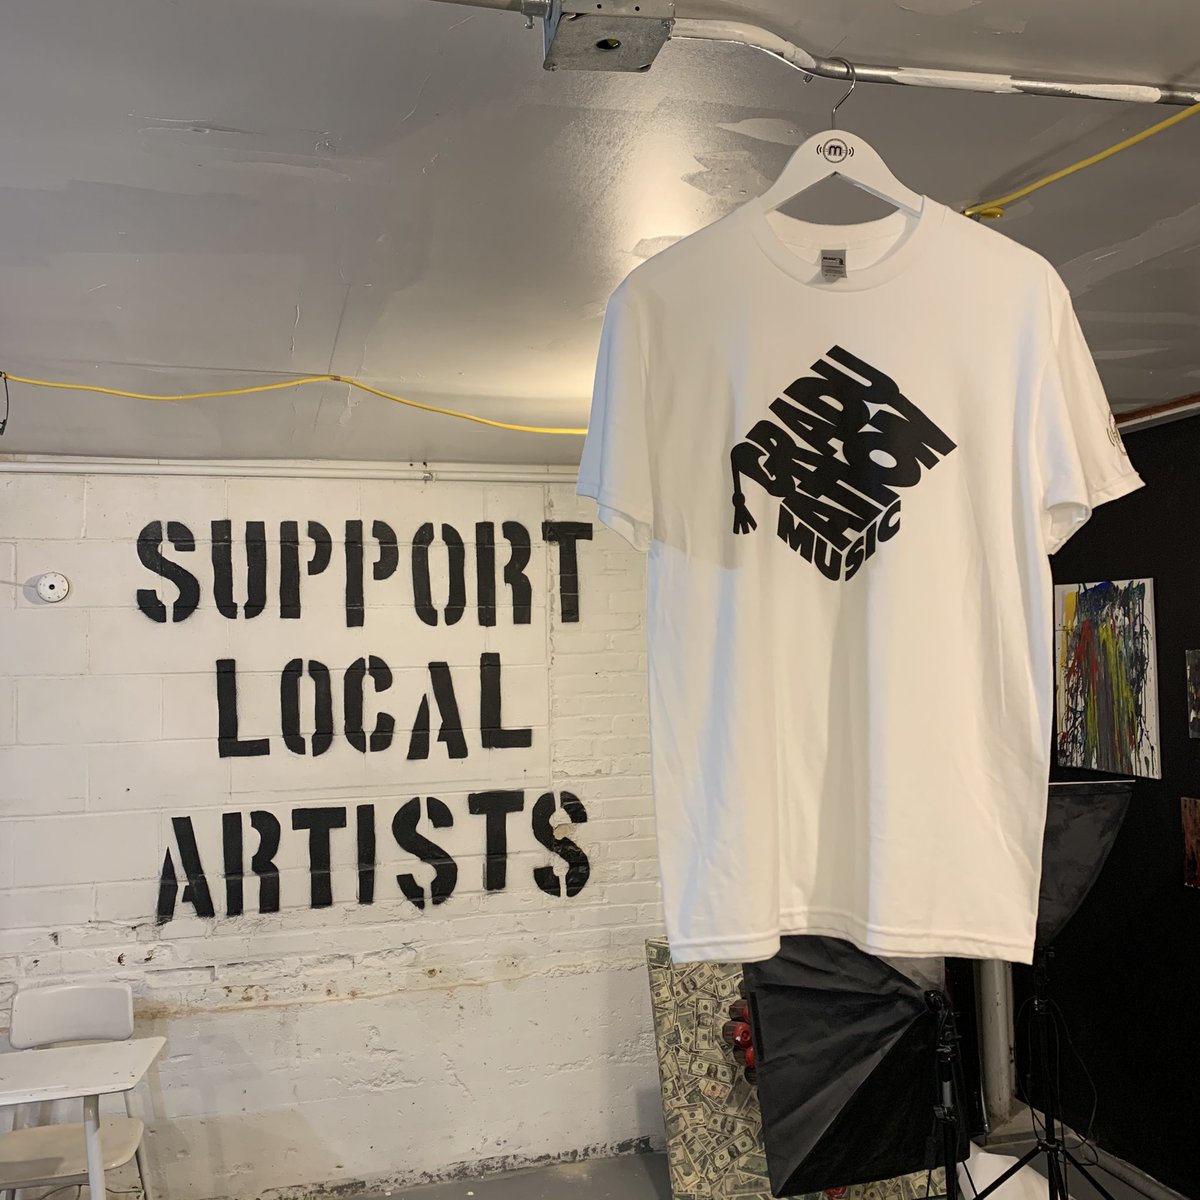 In honor of it being 6/17, we are thrilled to announce the launch of our @gradmusicboston t-shirts! Proceeds will be going directly to @ufiboston to assist in building a grow box for a community member in need! Click below to purchase + read more: graduationmusic.org/2020/06/17/gra…